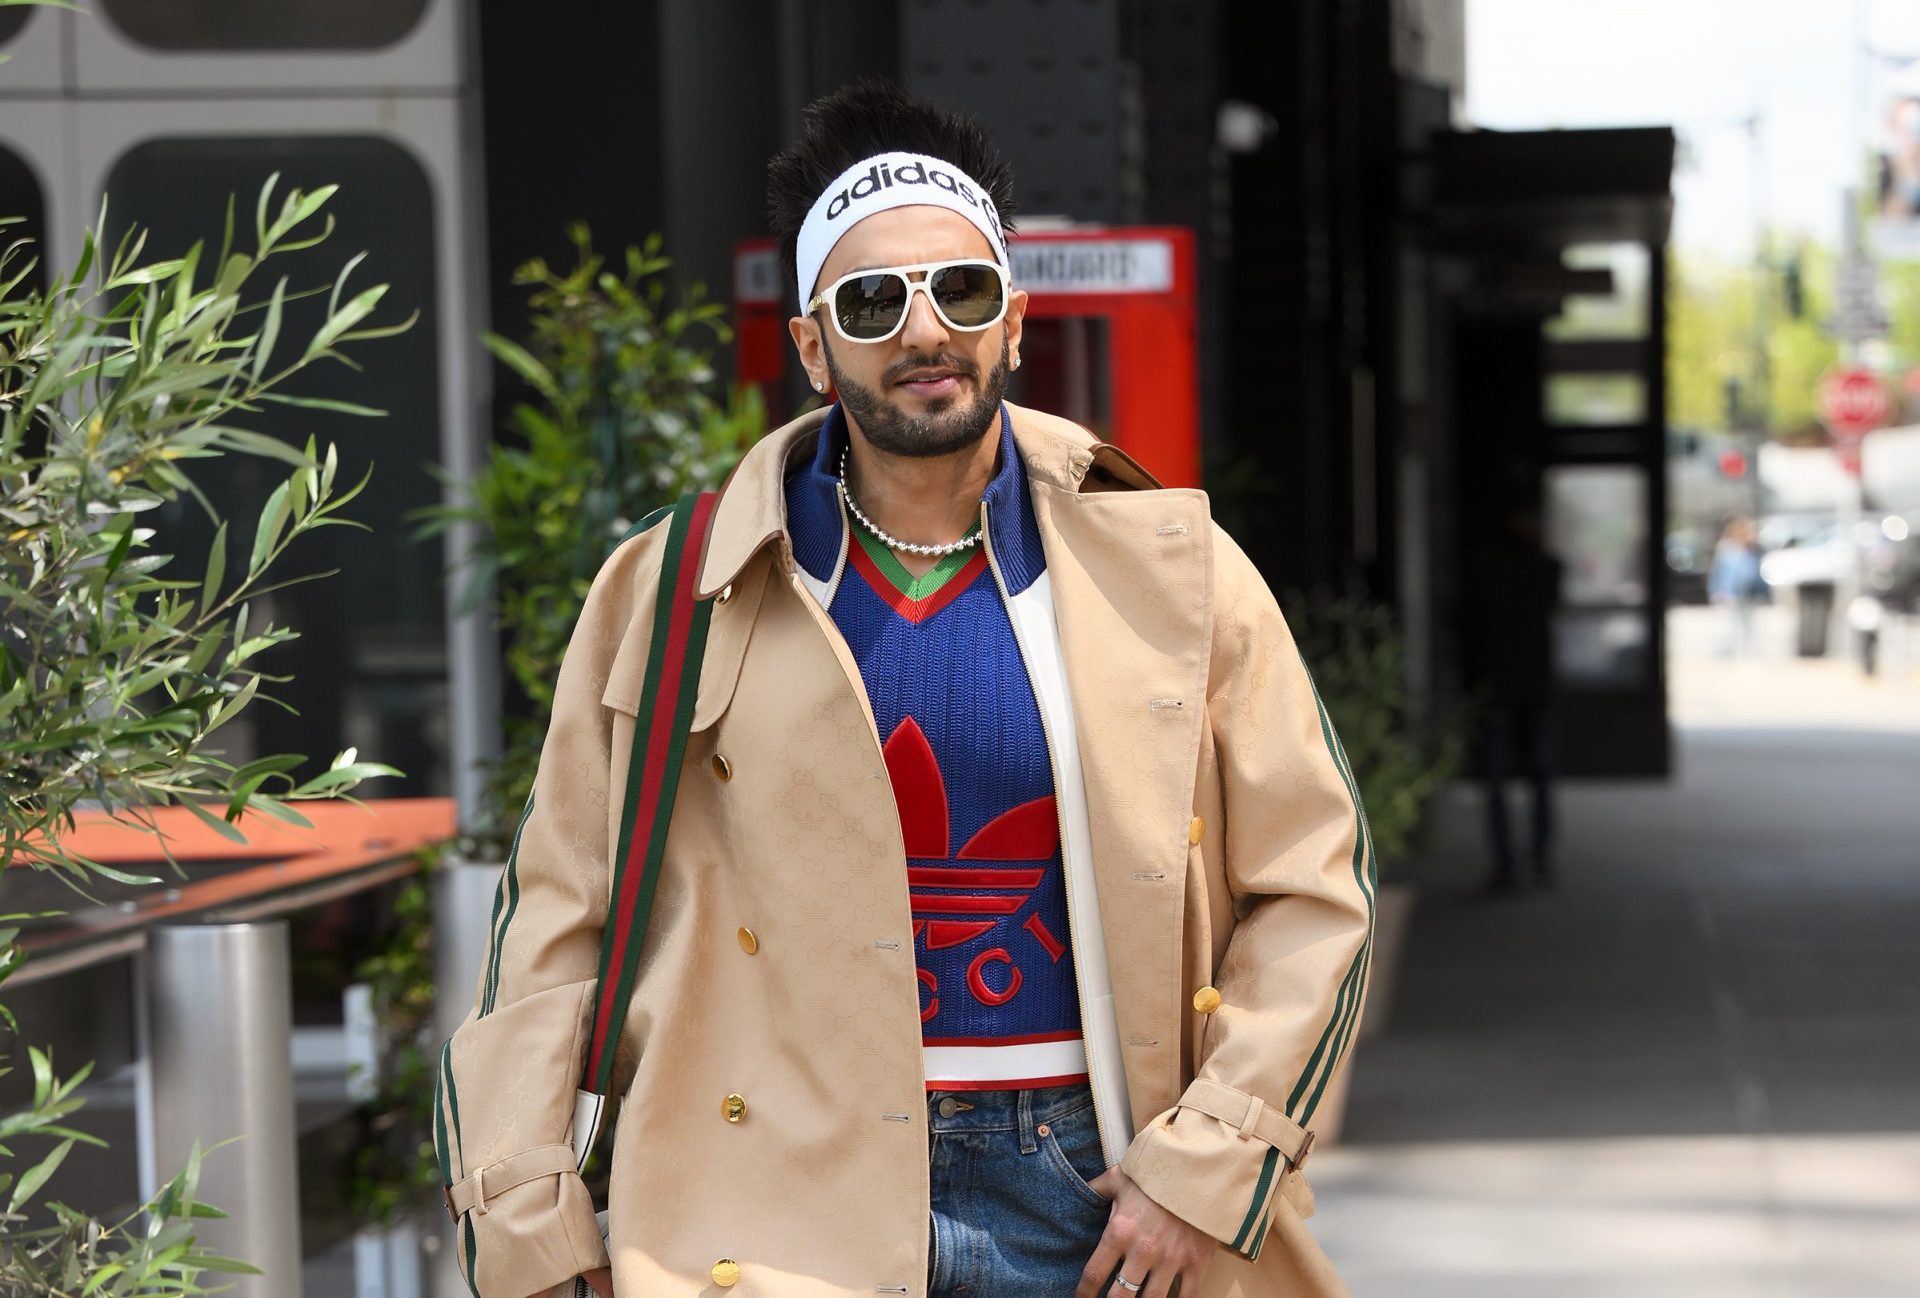 Ranveer Singh in New York: The Actor Will Be Attending A Tiffany & Co Event